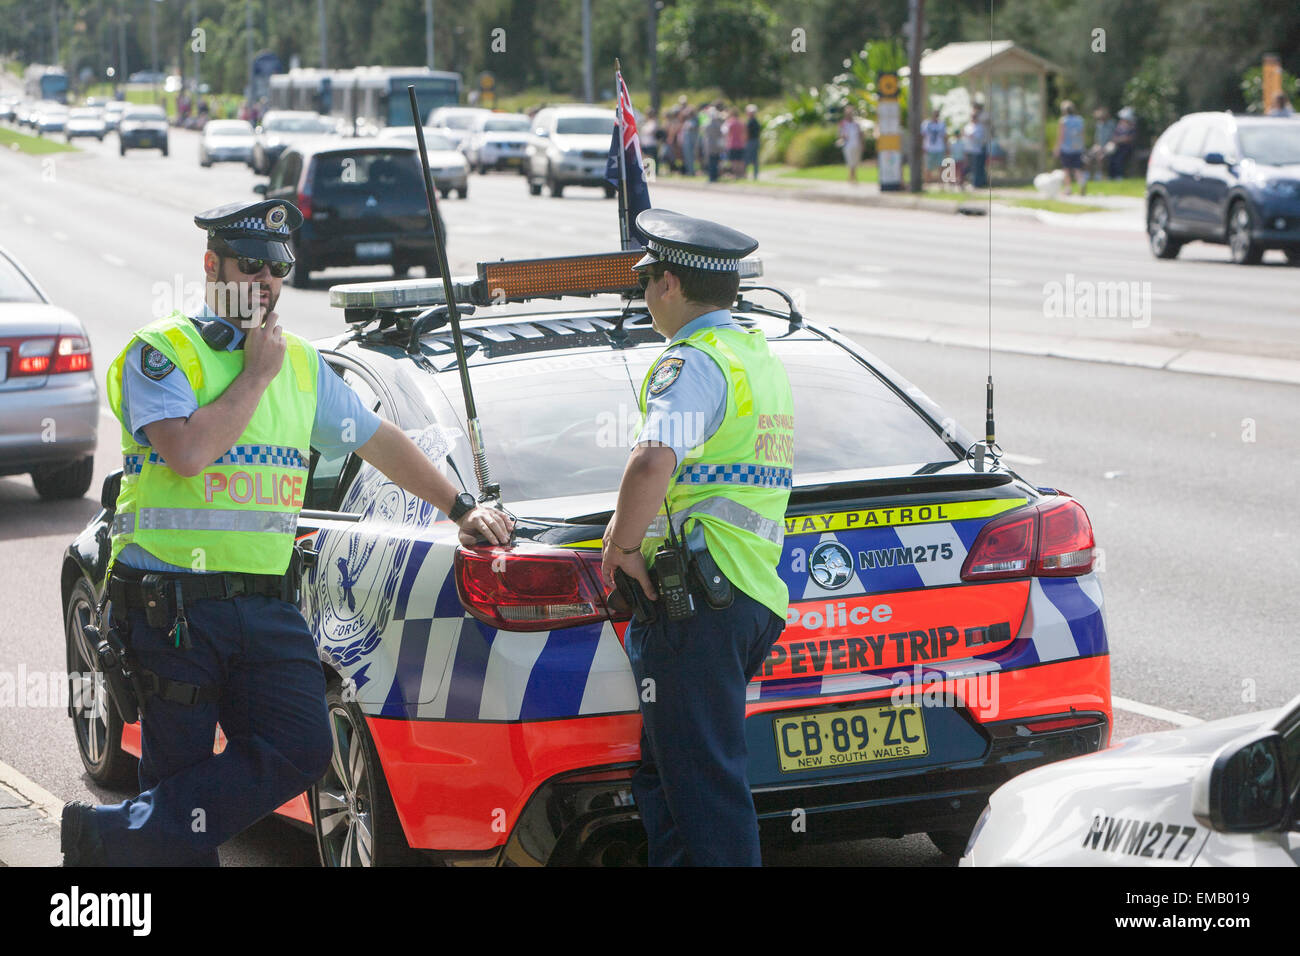 Sydney,Australia. 19th April, 2015. ANZAC commemorative and centenary march along pittwater road Warriewood to celebrate 100 years of  ANZAC, Sydney policemen with police car monitor activities, ( australian and new zealand army corps) alamy live news Credit:  martin berry/Alamy Live News Stock Photo